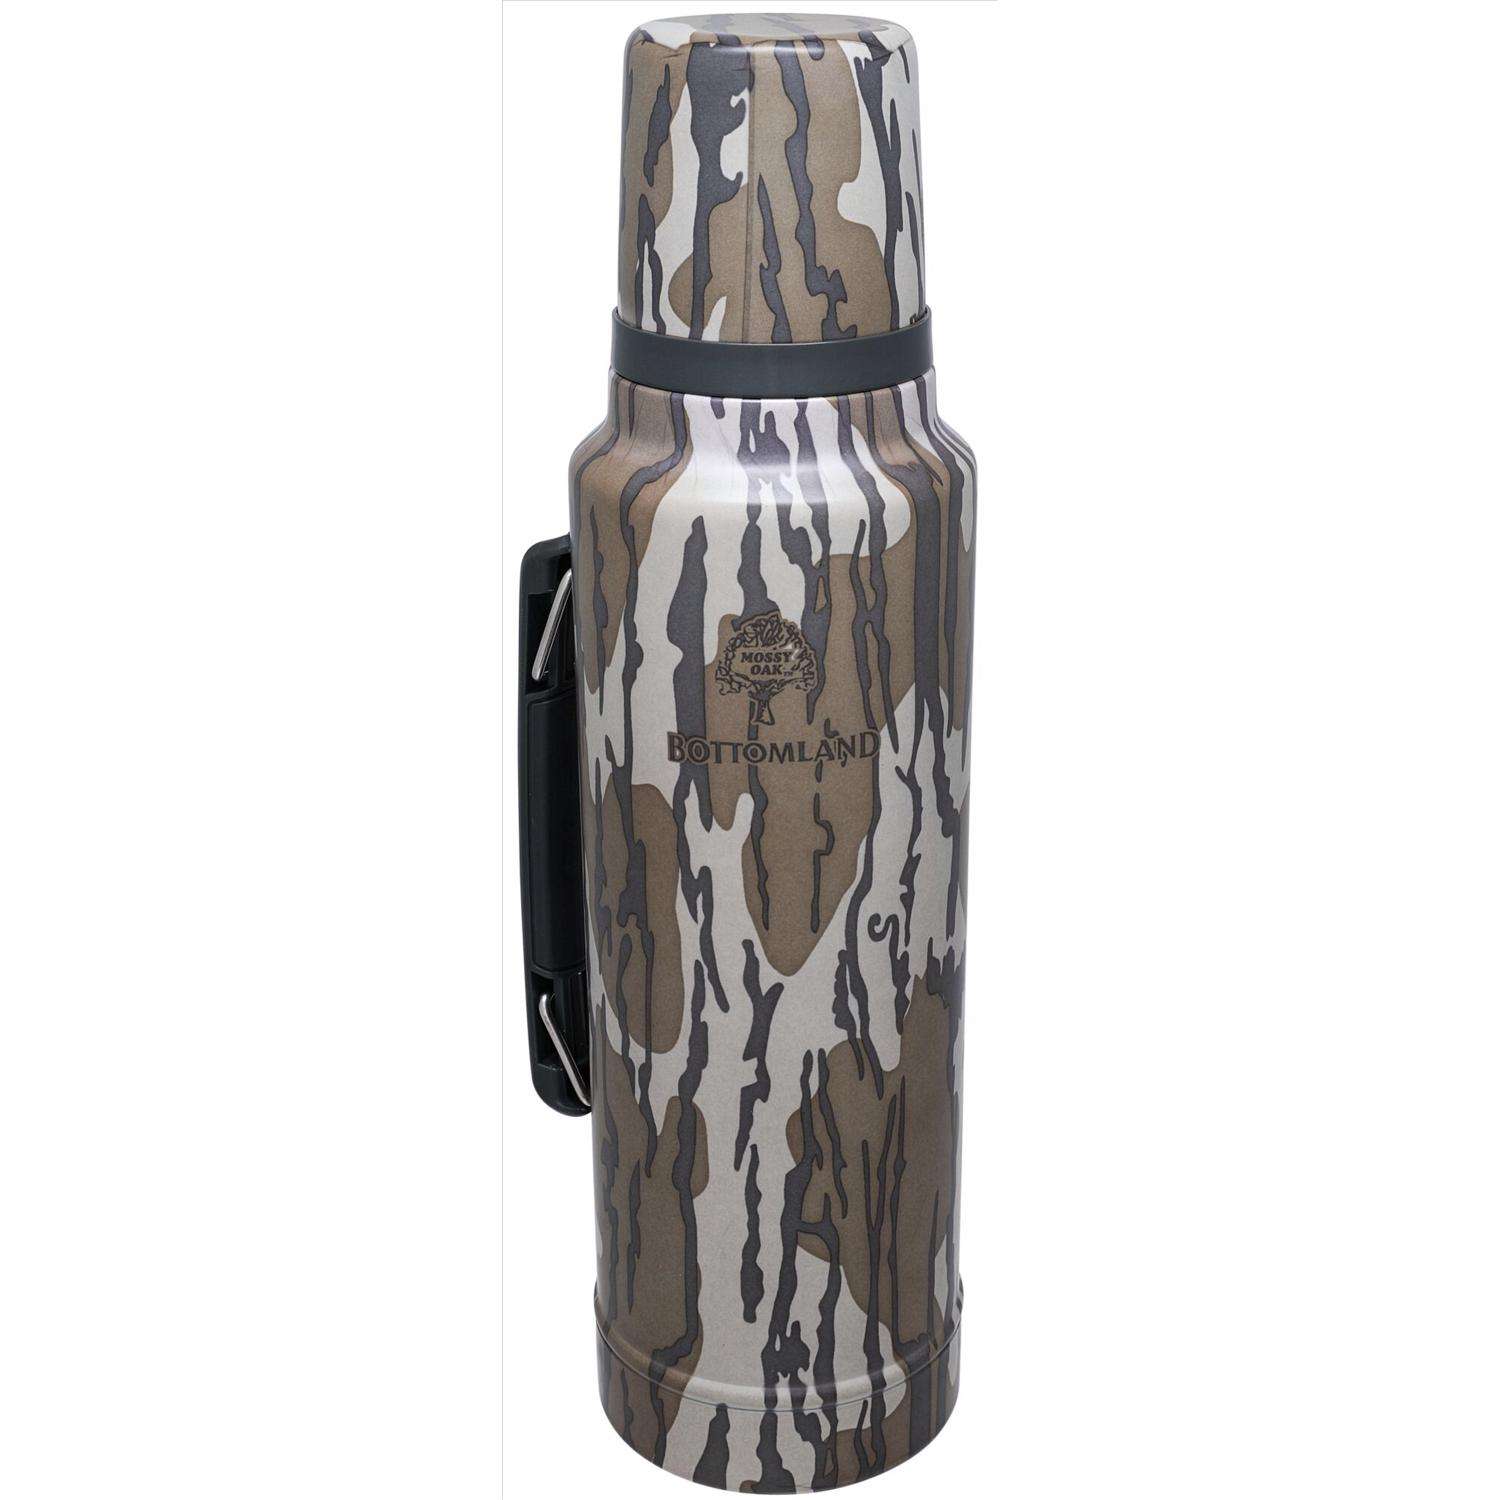 Built For The Field Stanley X Moss Oak Camo Collab Stanley, 54% OFF